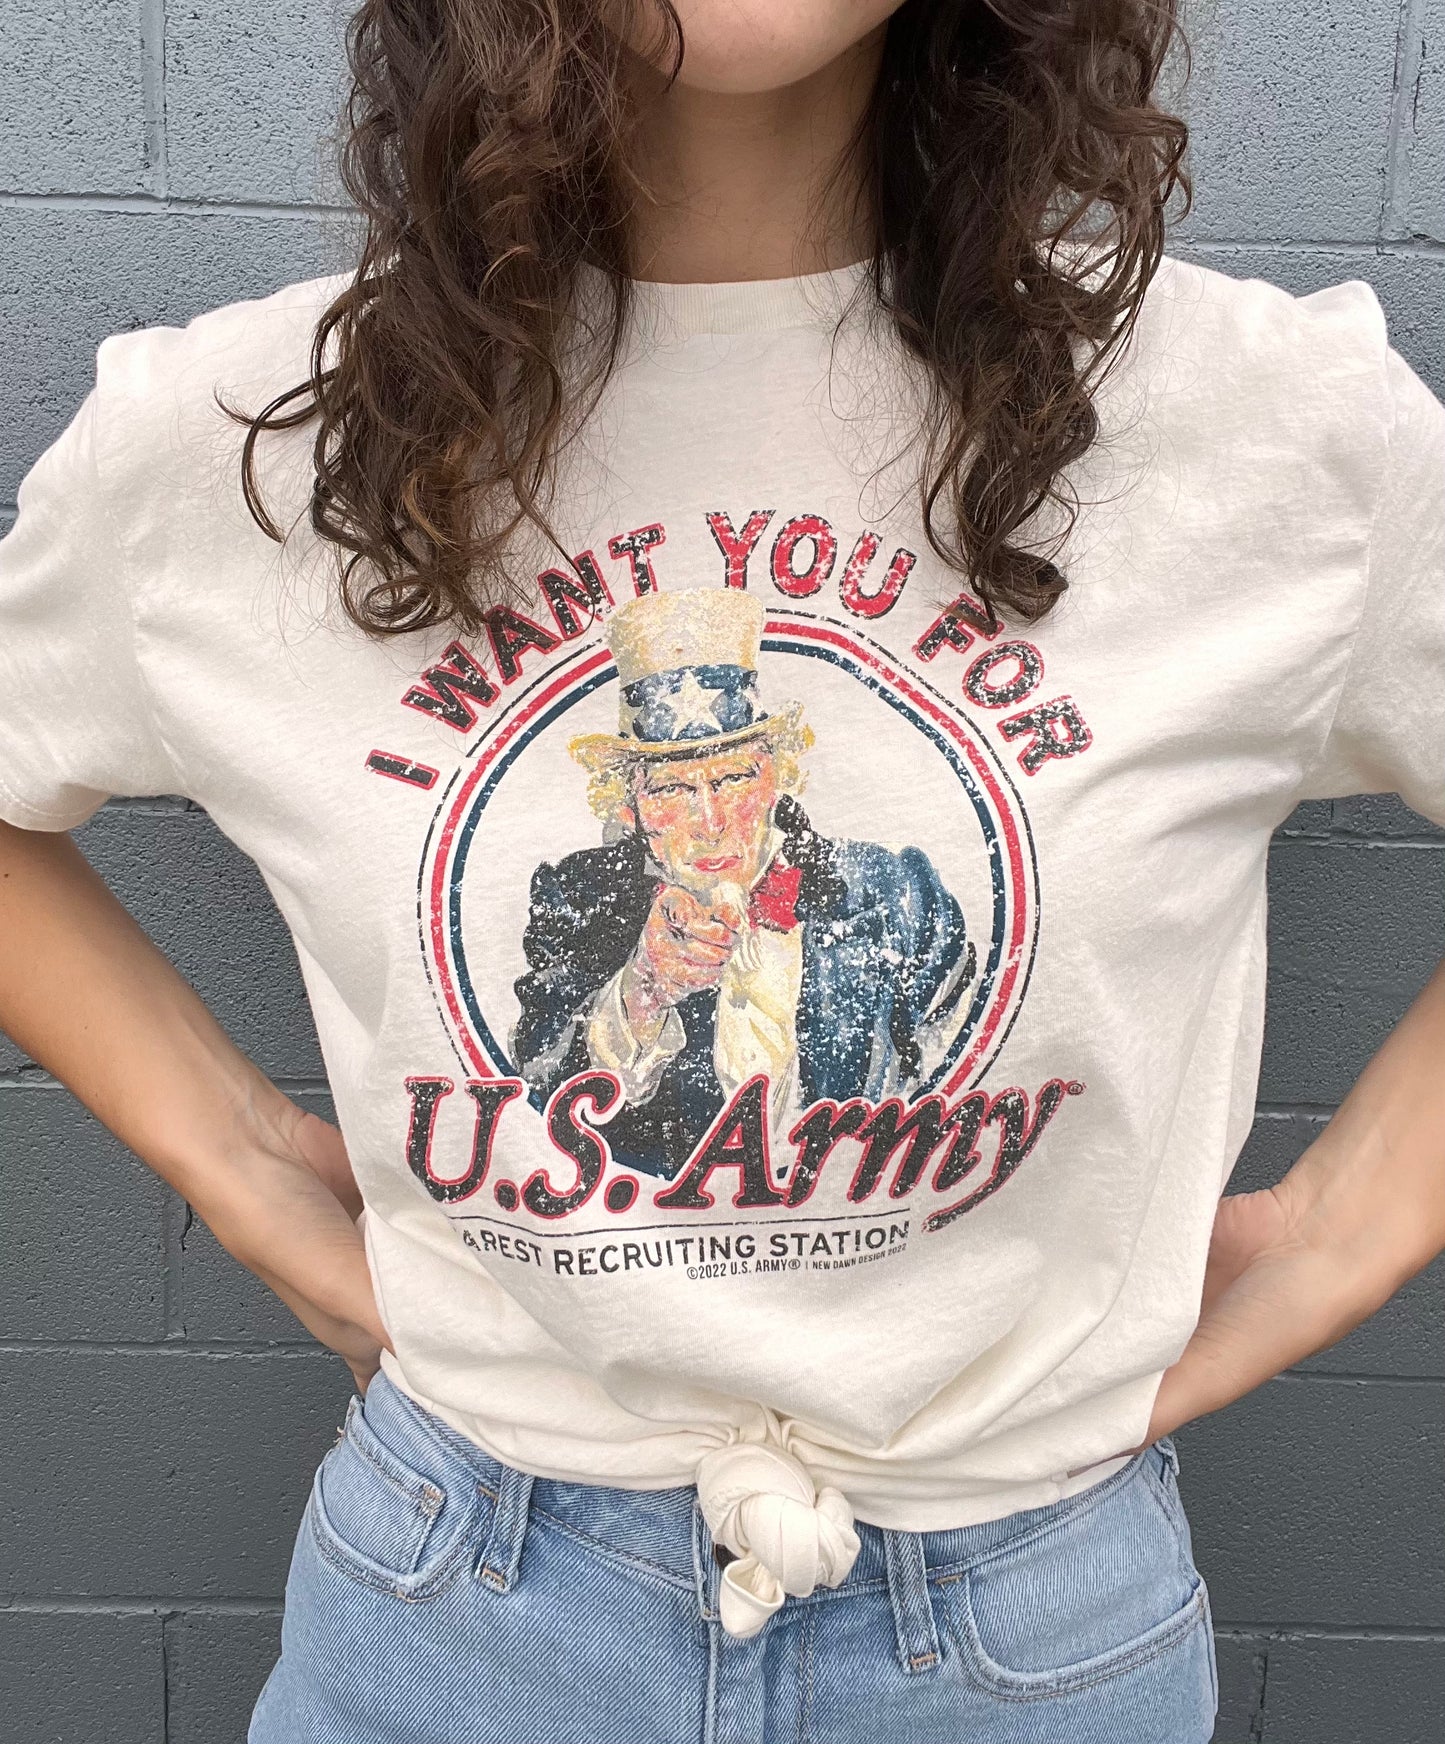 Uncle Sam | I want YOU for U.S. Army ® | Historical War Poster | Vintage Natural Unisex Tee